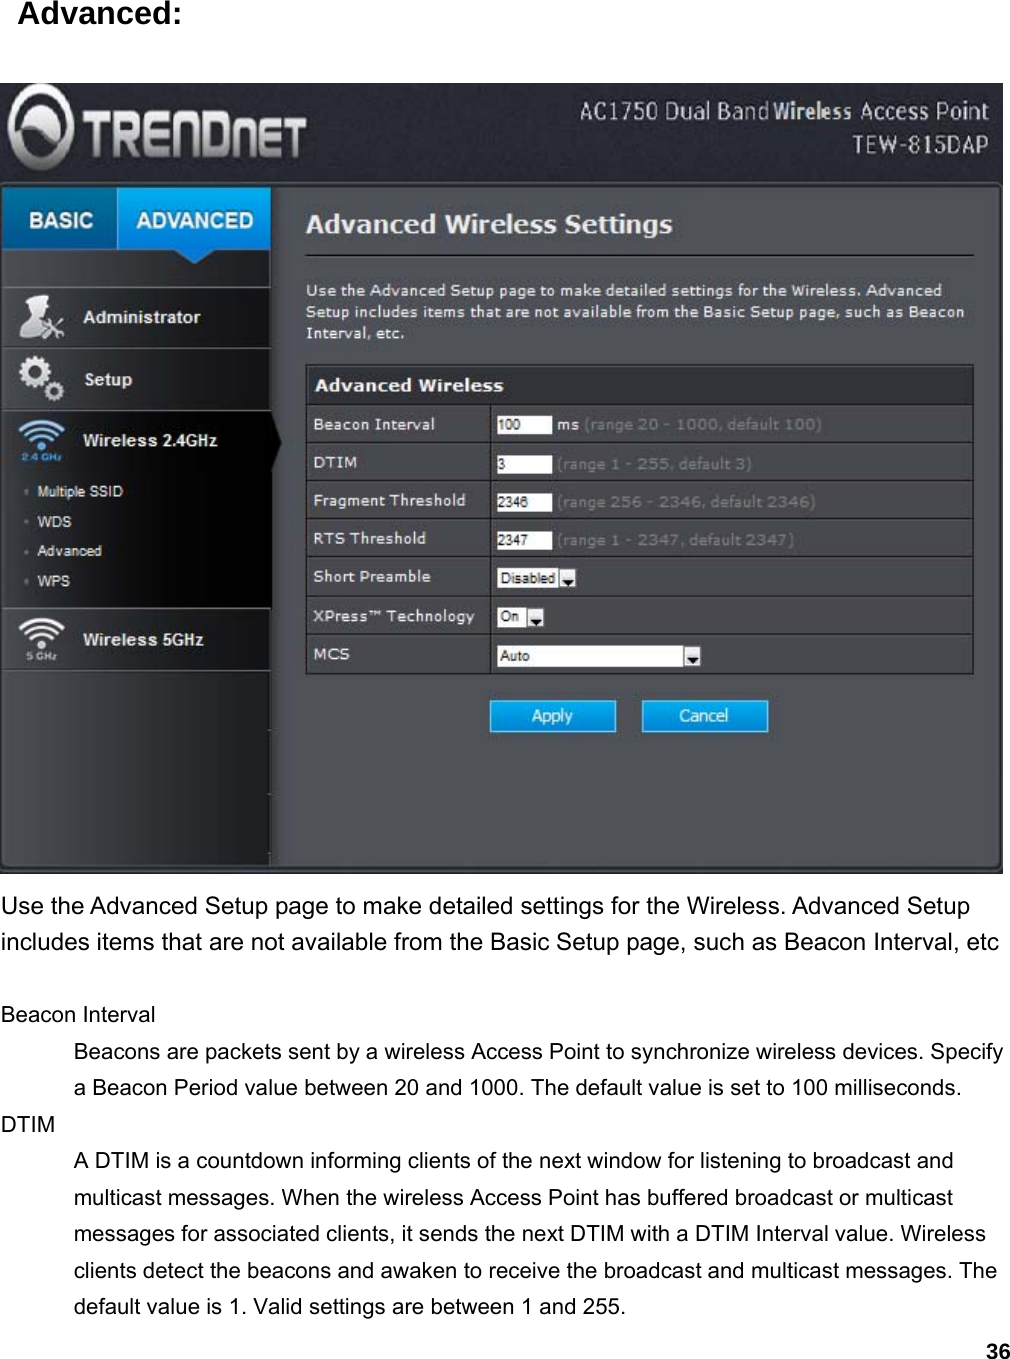 36  Advanced:  Use the Advanced Setup page to make detailed settings for the Wireless. Advanced Setup includes items that are not available from the Basic Setup page, such as Beacon Interval, etc  Beacon Interval   Beacons are packets sent by a wireless Access Point to synchronize wireless devices. Specify a Beacon Period value between 20 and 1000. The default value is set to 100 milliseconds.   DTIM  A DTIM is a countdown informing clients of the next window for listening to broadcast and multicast messages. When the wireless Access Point has buffered broadcast or multicast messages for associated clients, it sends the next DTIM with a DTIM Interval value. Wireless clients detect the beacons and awaken to receive the broadcast and multicast messages. The default value is 1. Valid settings are between 1 and 255.   